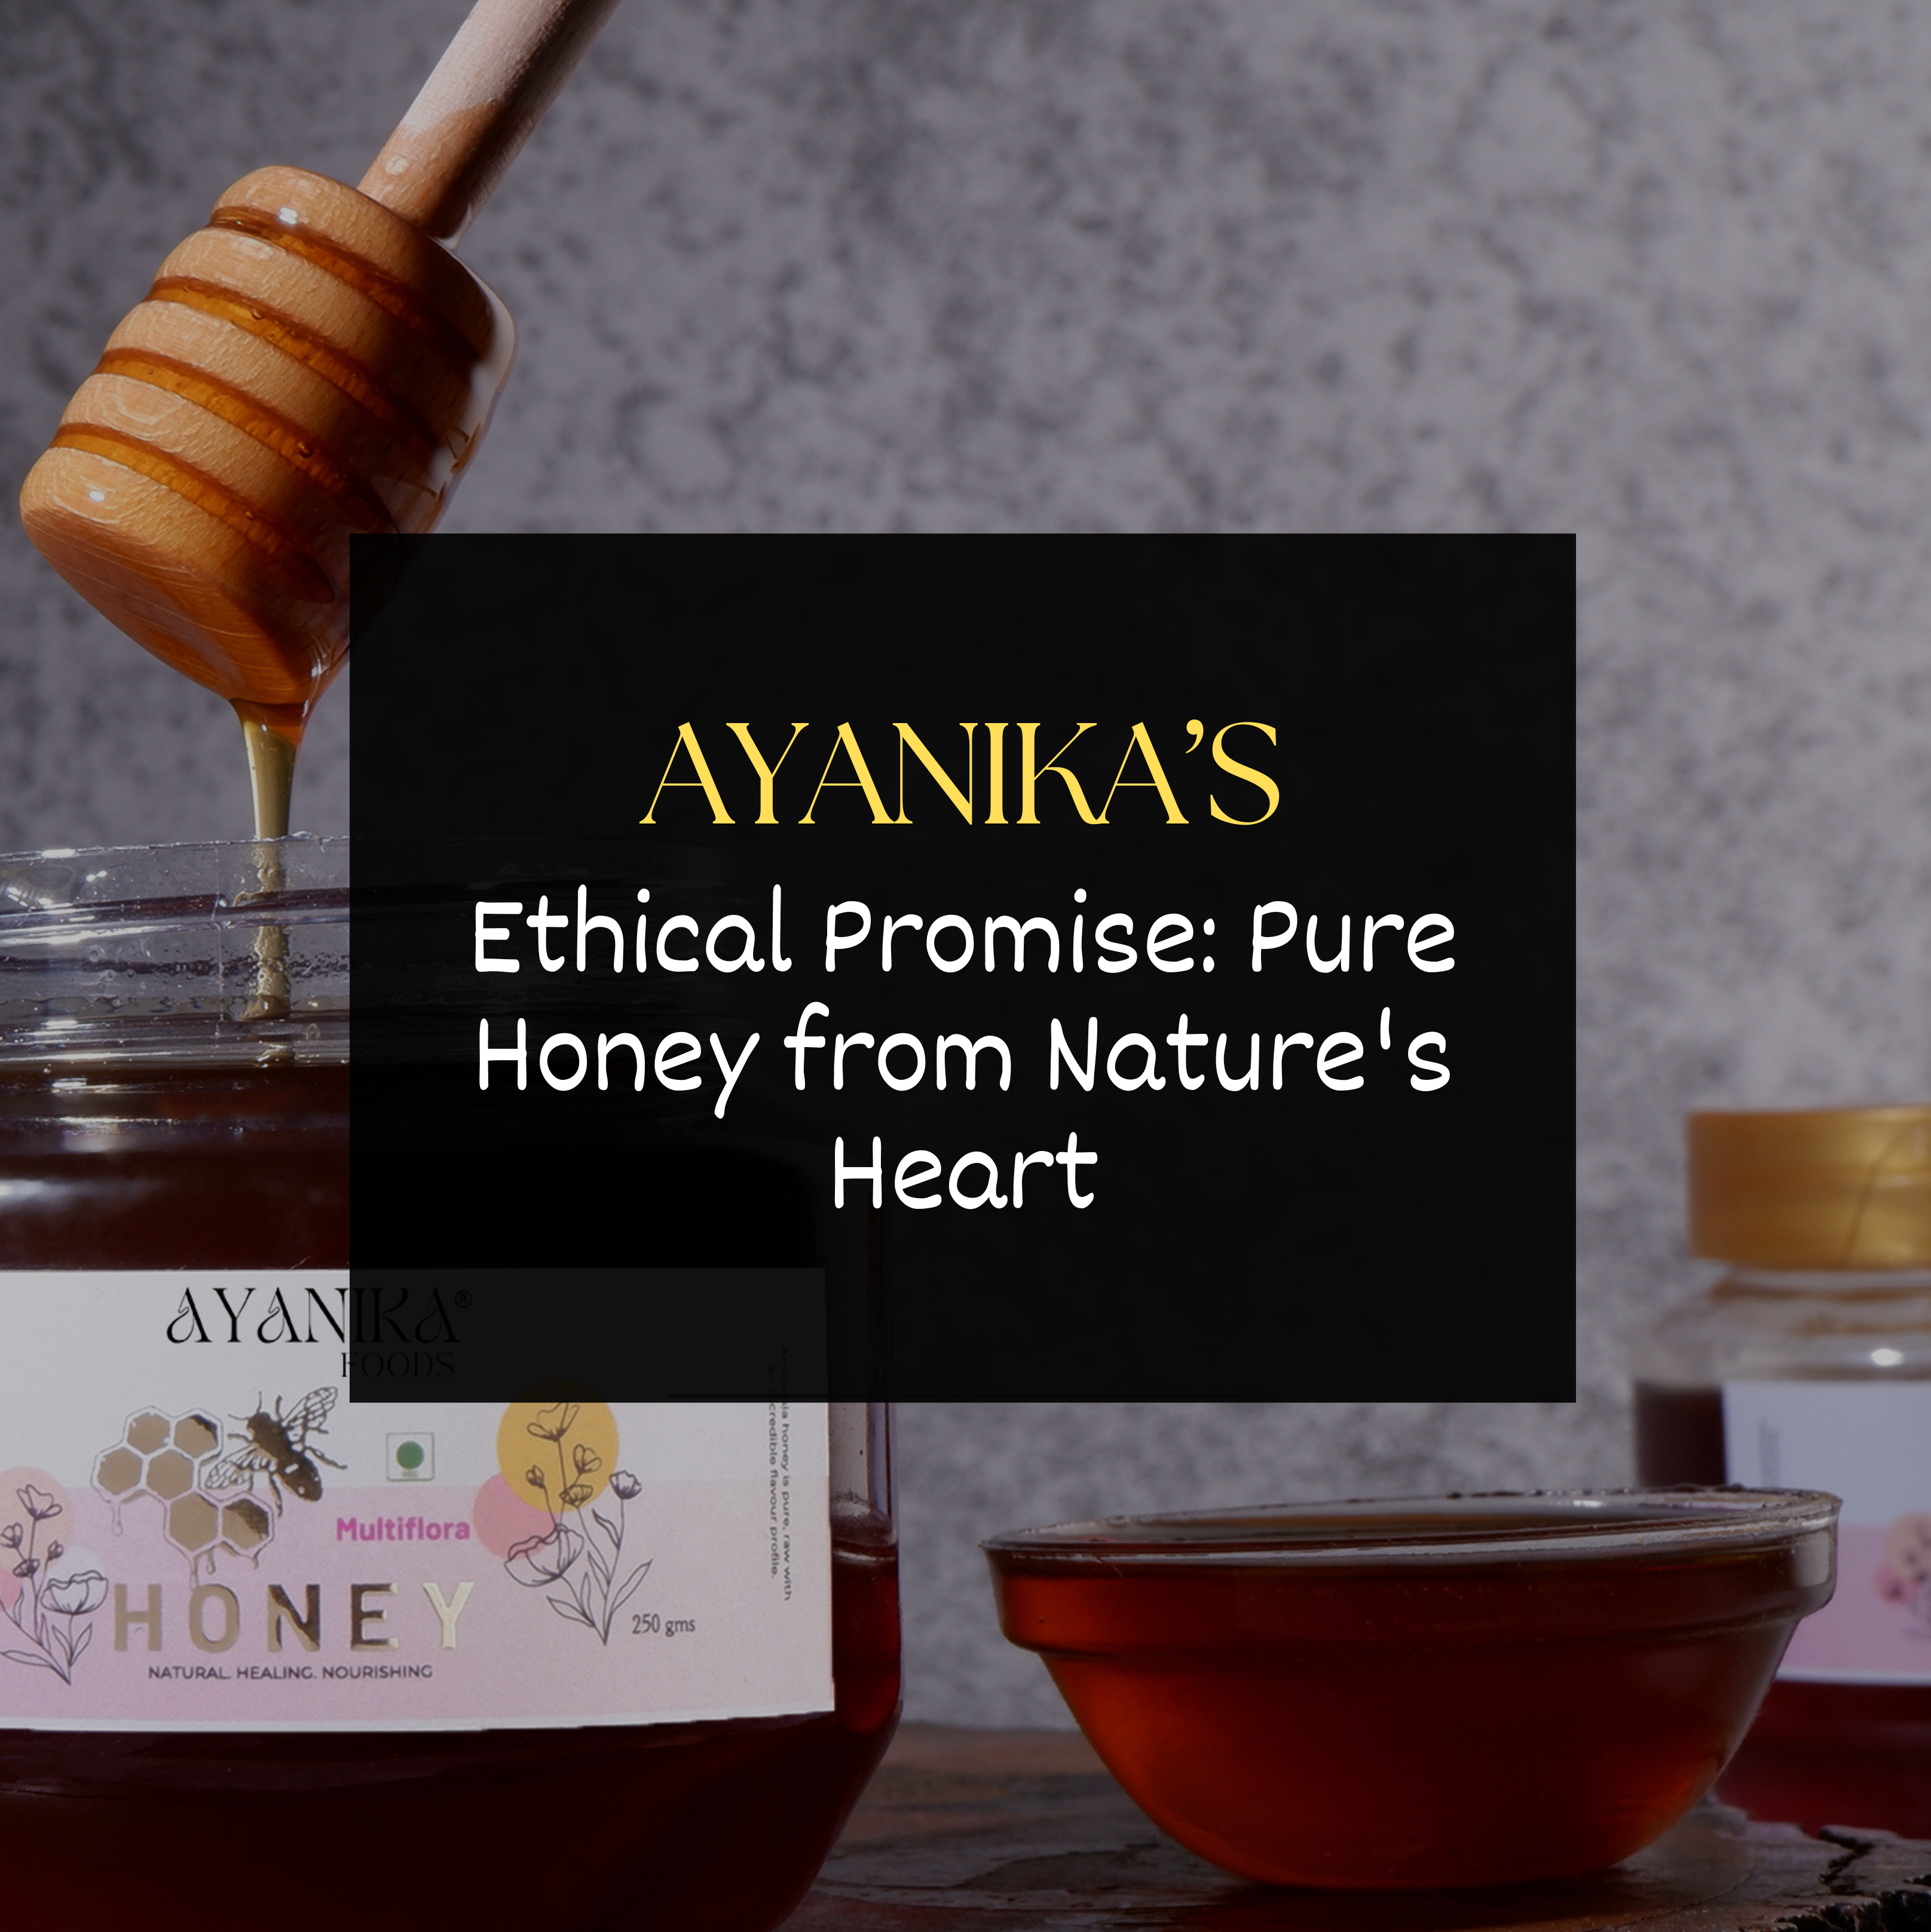 Ayanika's Ethical Promise: Pure Honey from Nature's Heart